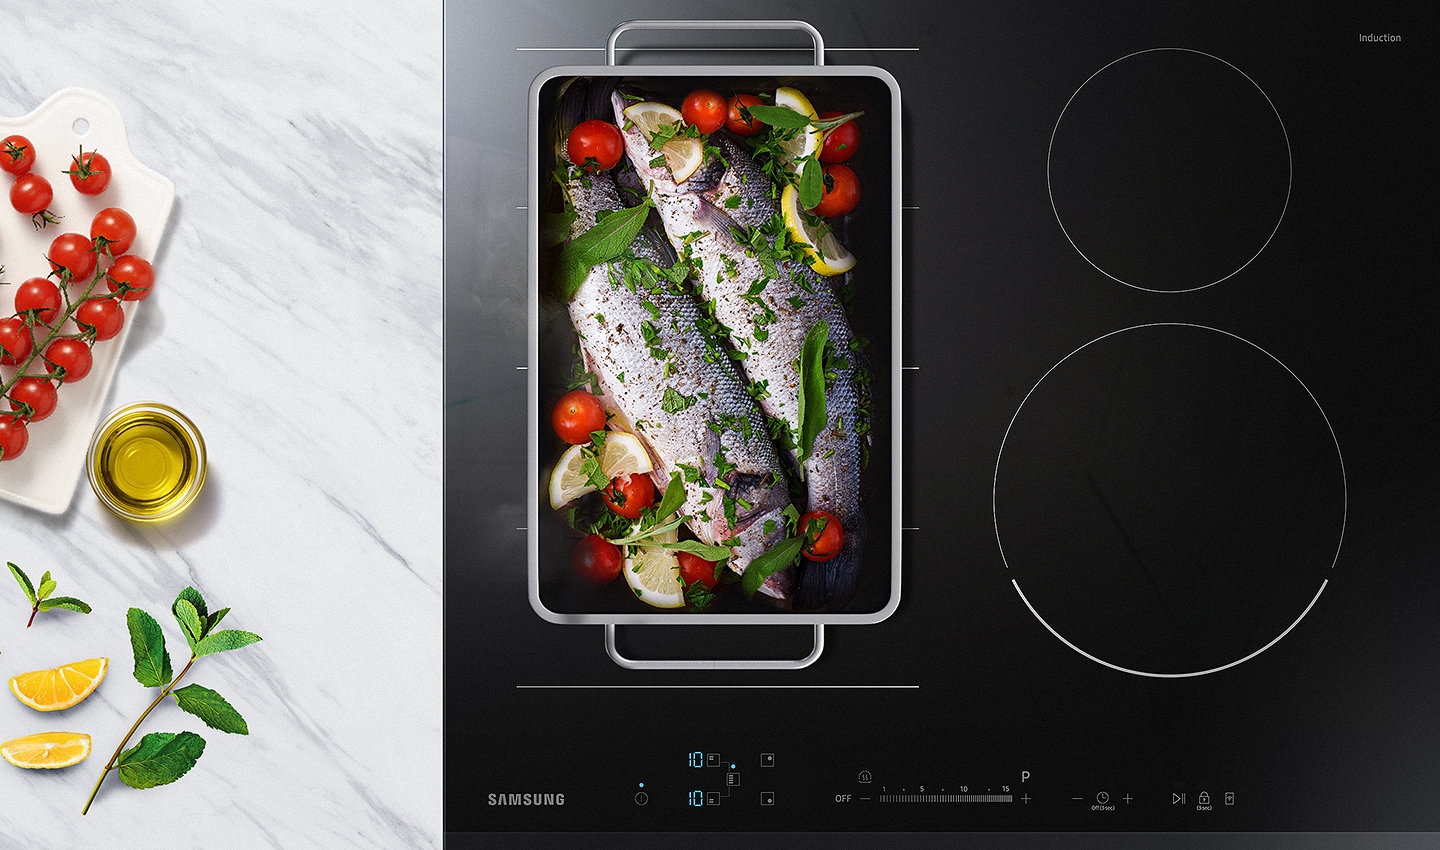 Flexibly cook even more dishes together